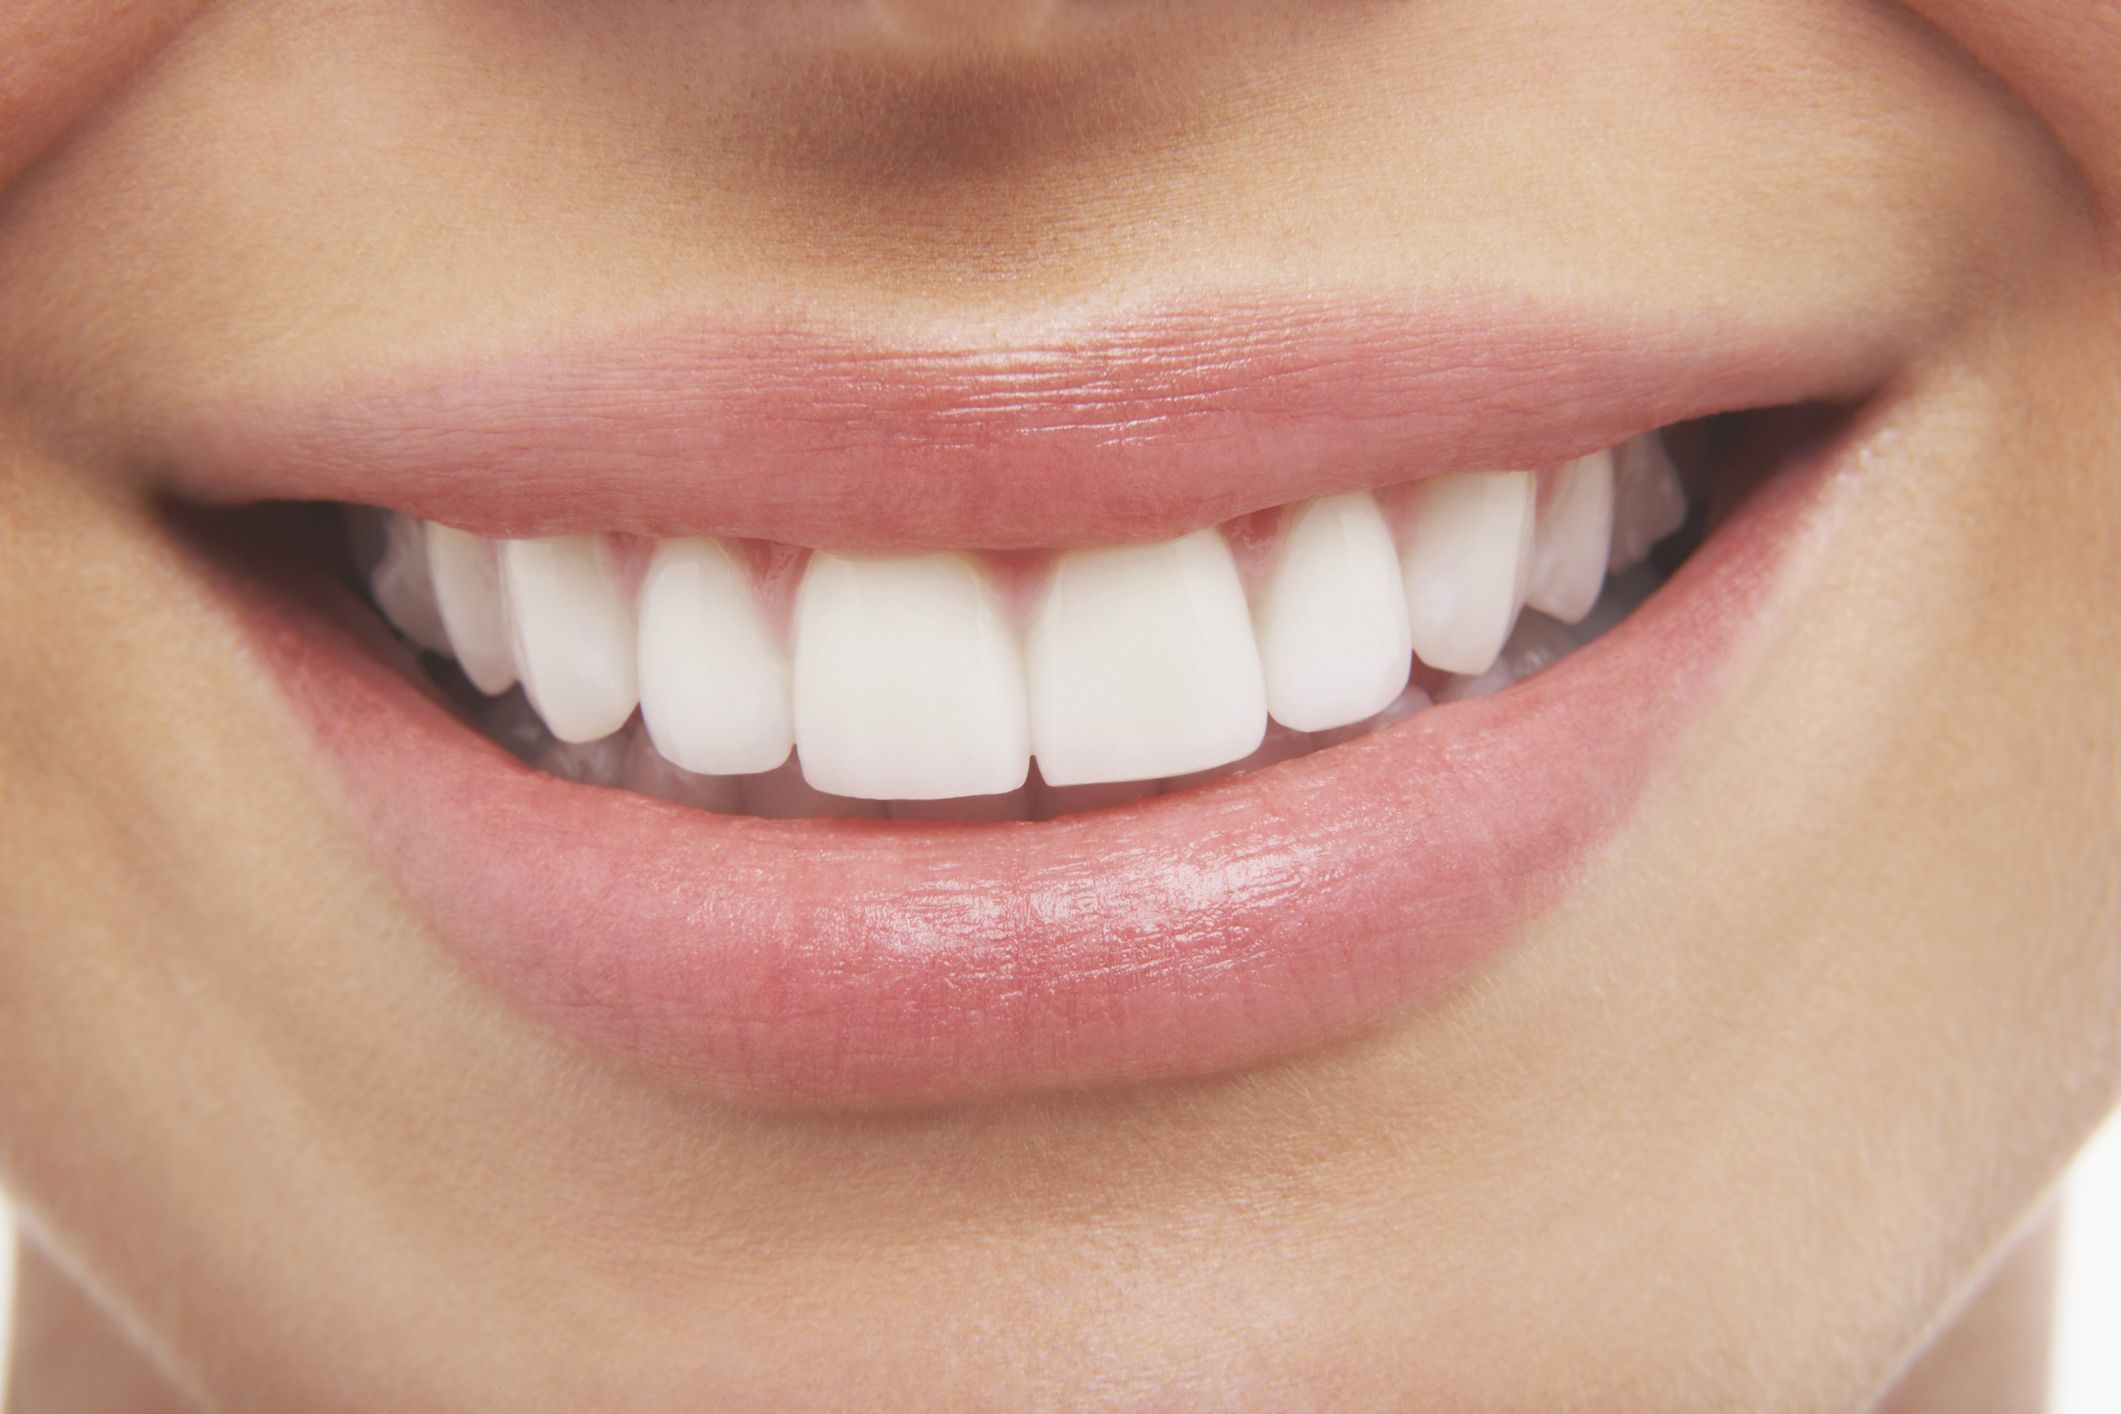 11 Foods to avoid if you want Beautiful, White Teeth